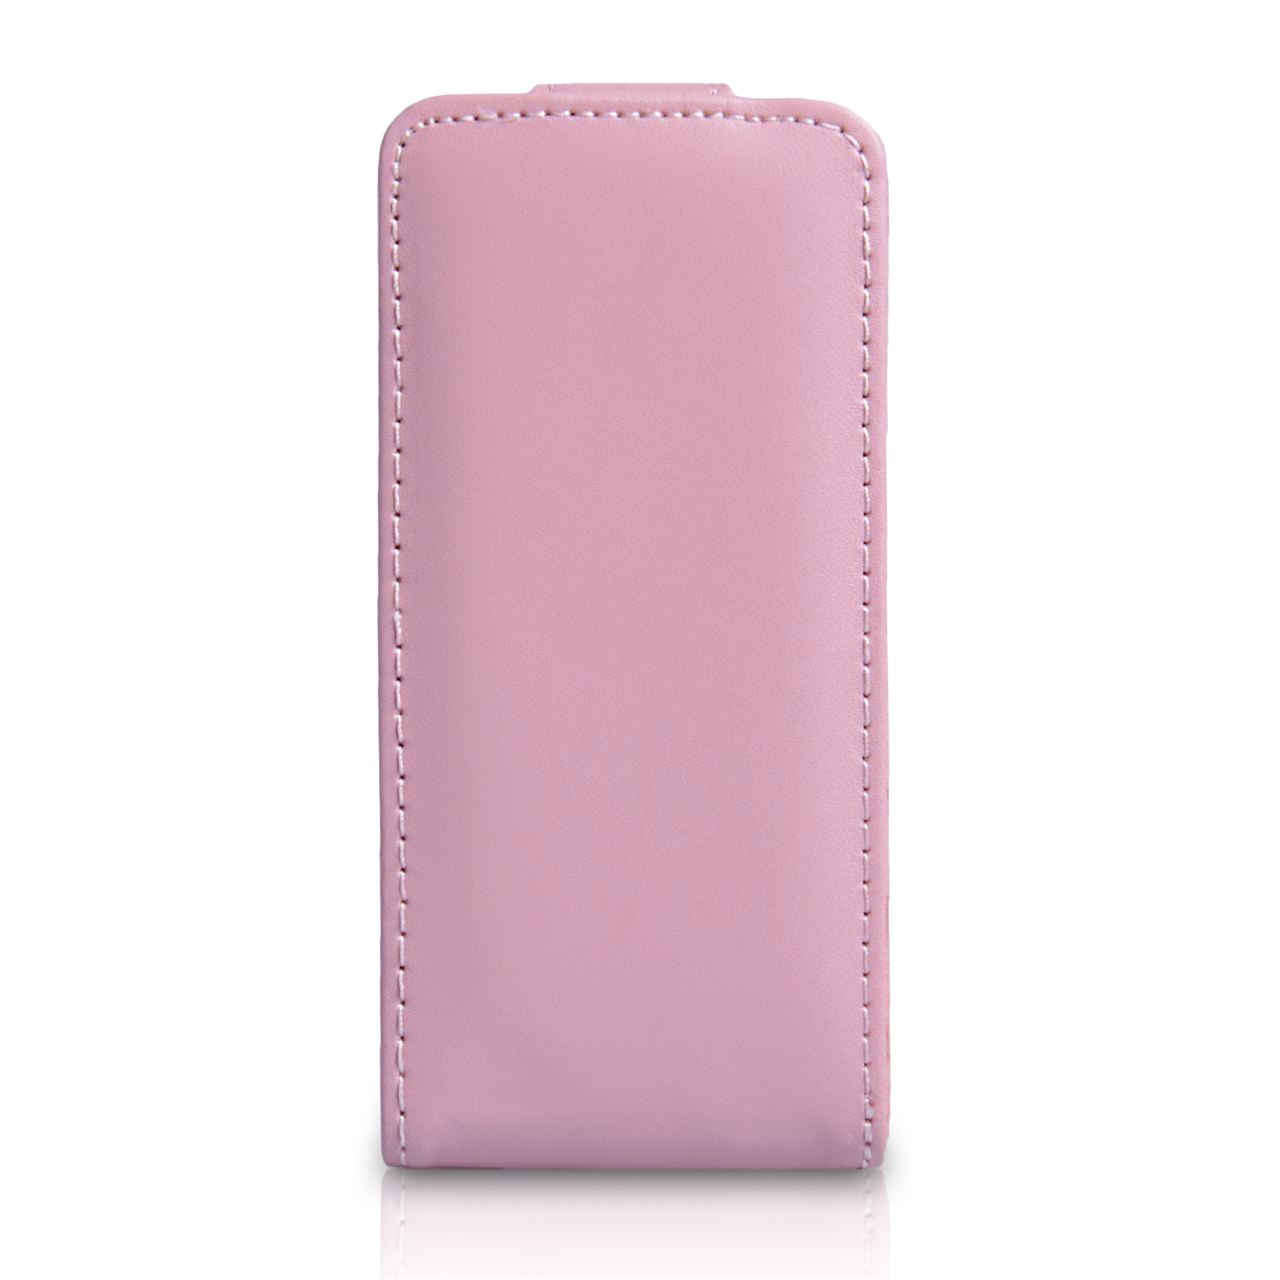 YouSave Accessories iPhone 5C Leather Effect Flip Case - Baby Pink